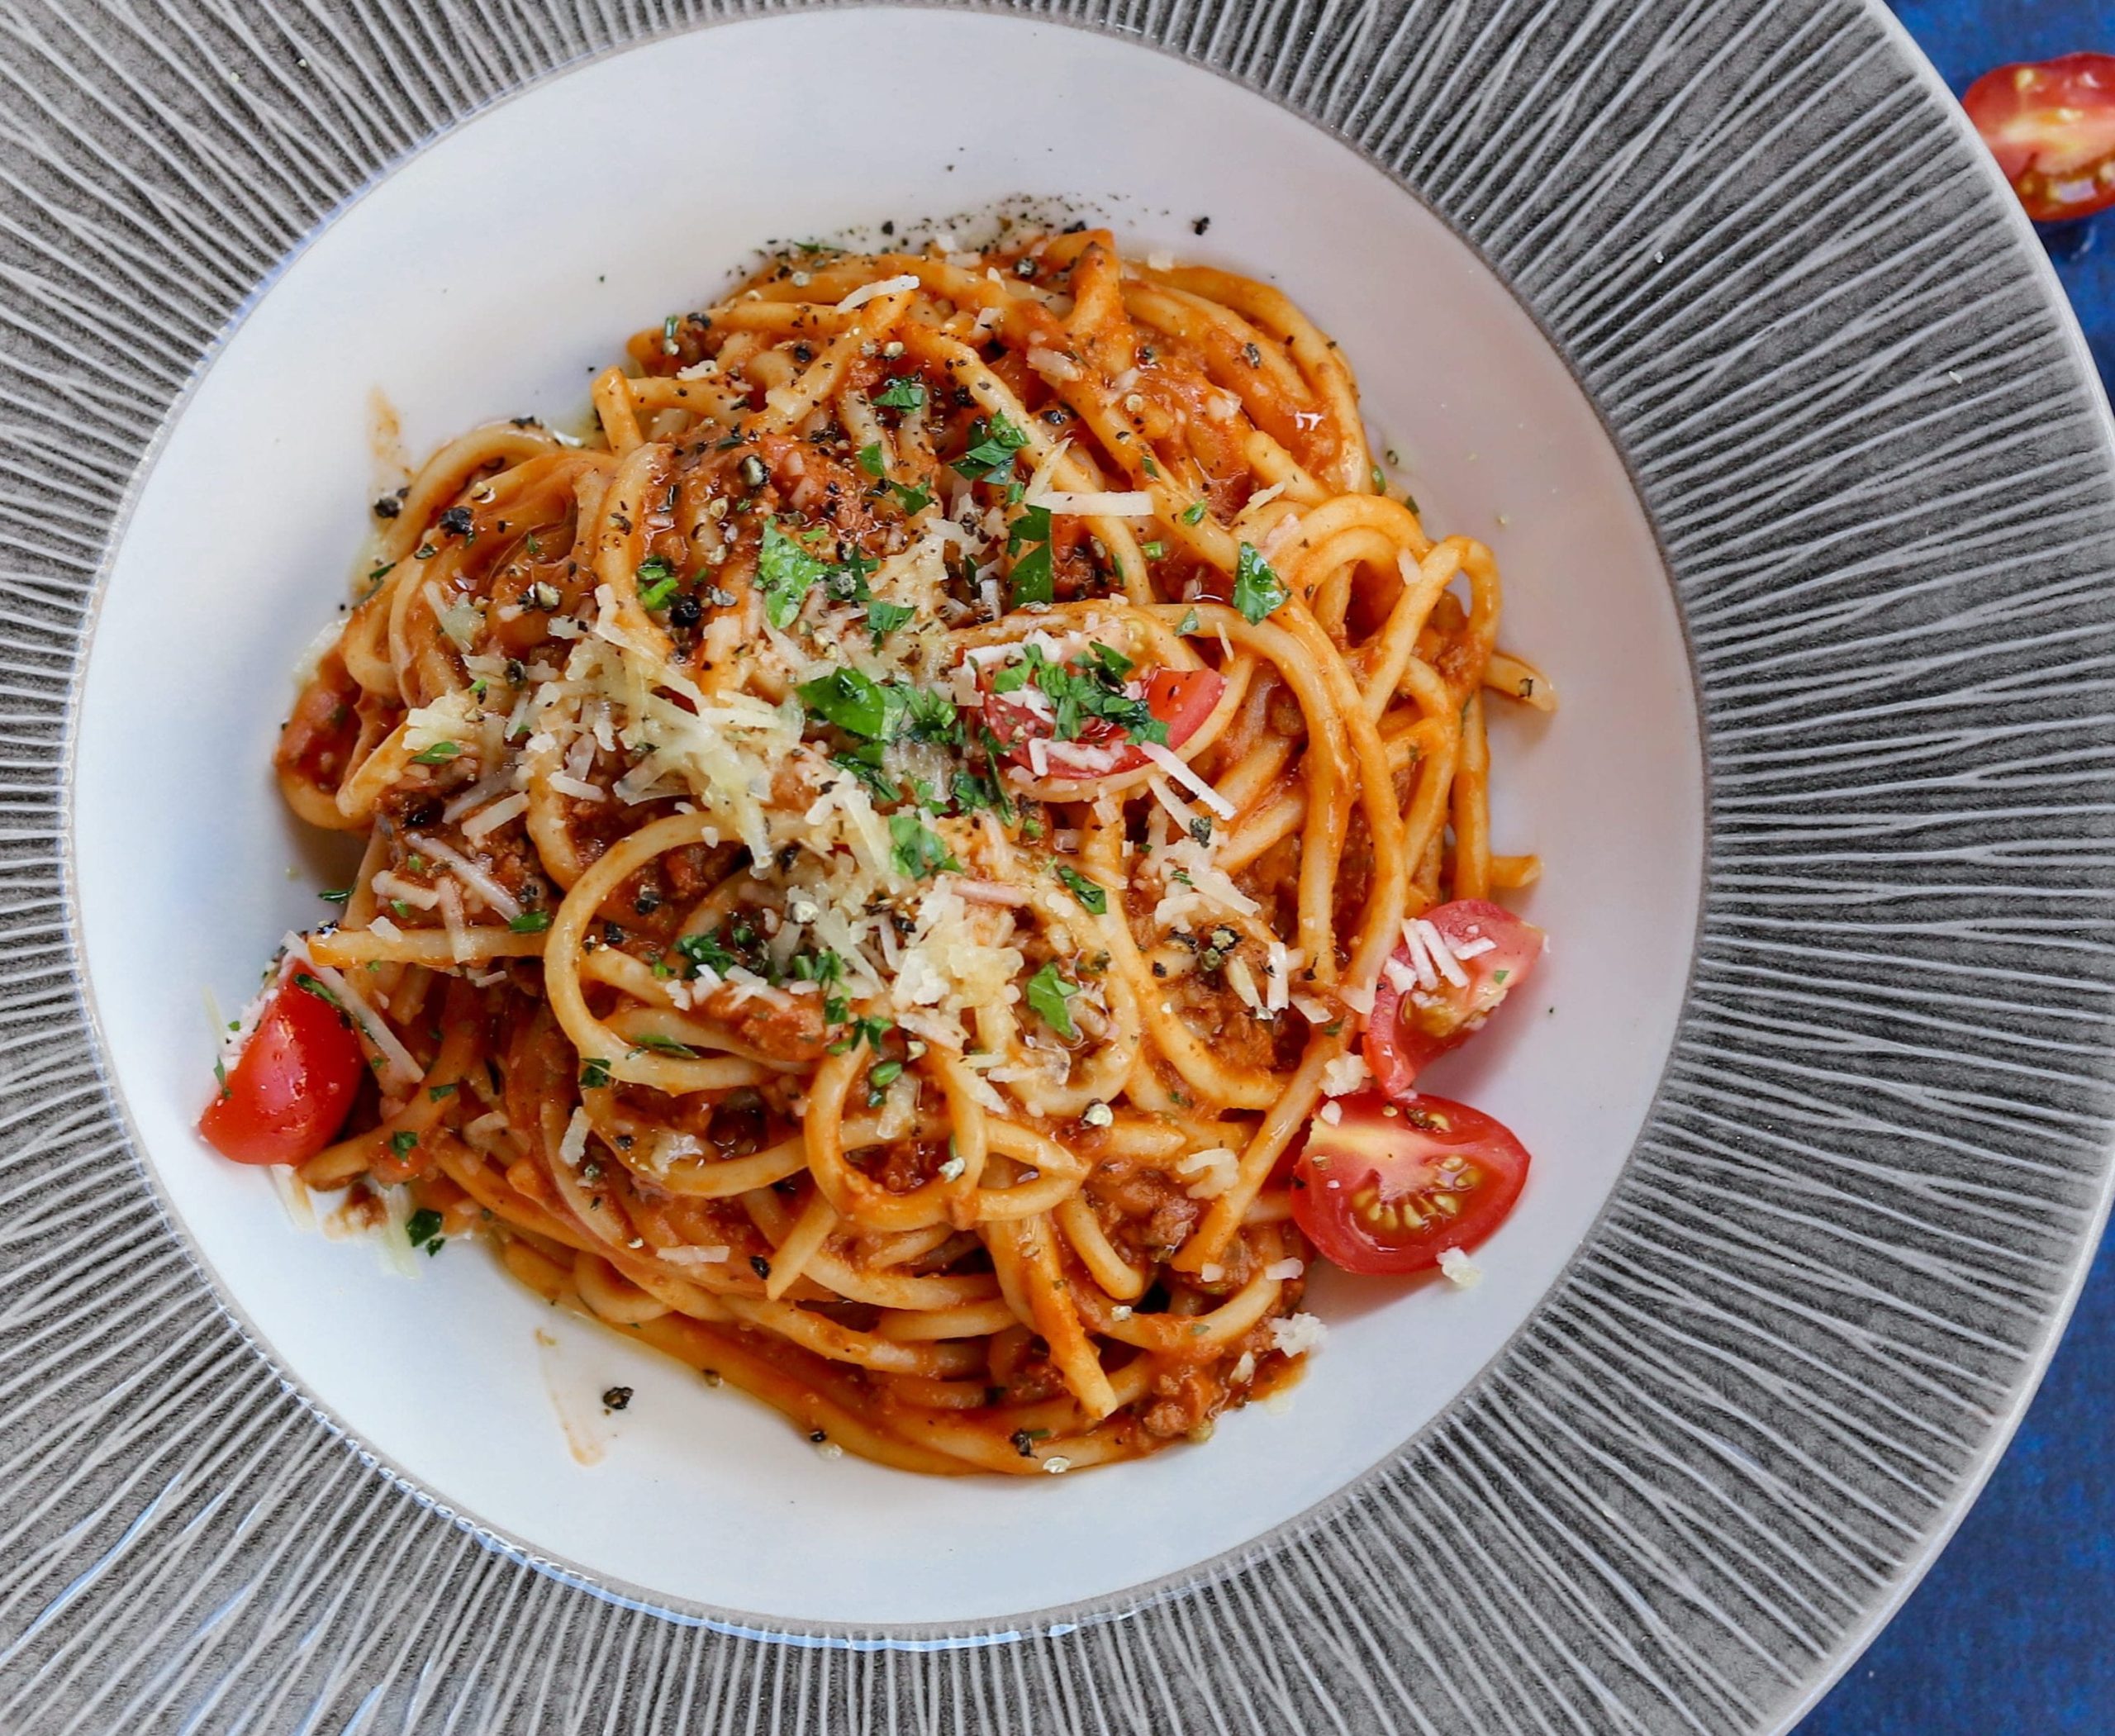 A bowl of spaghetti with a tomato sauce. There are sliced tomatoes, chopped green leaves and cheese on top of it.